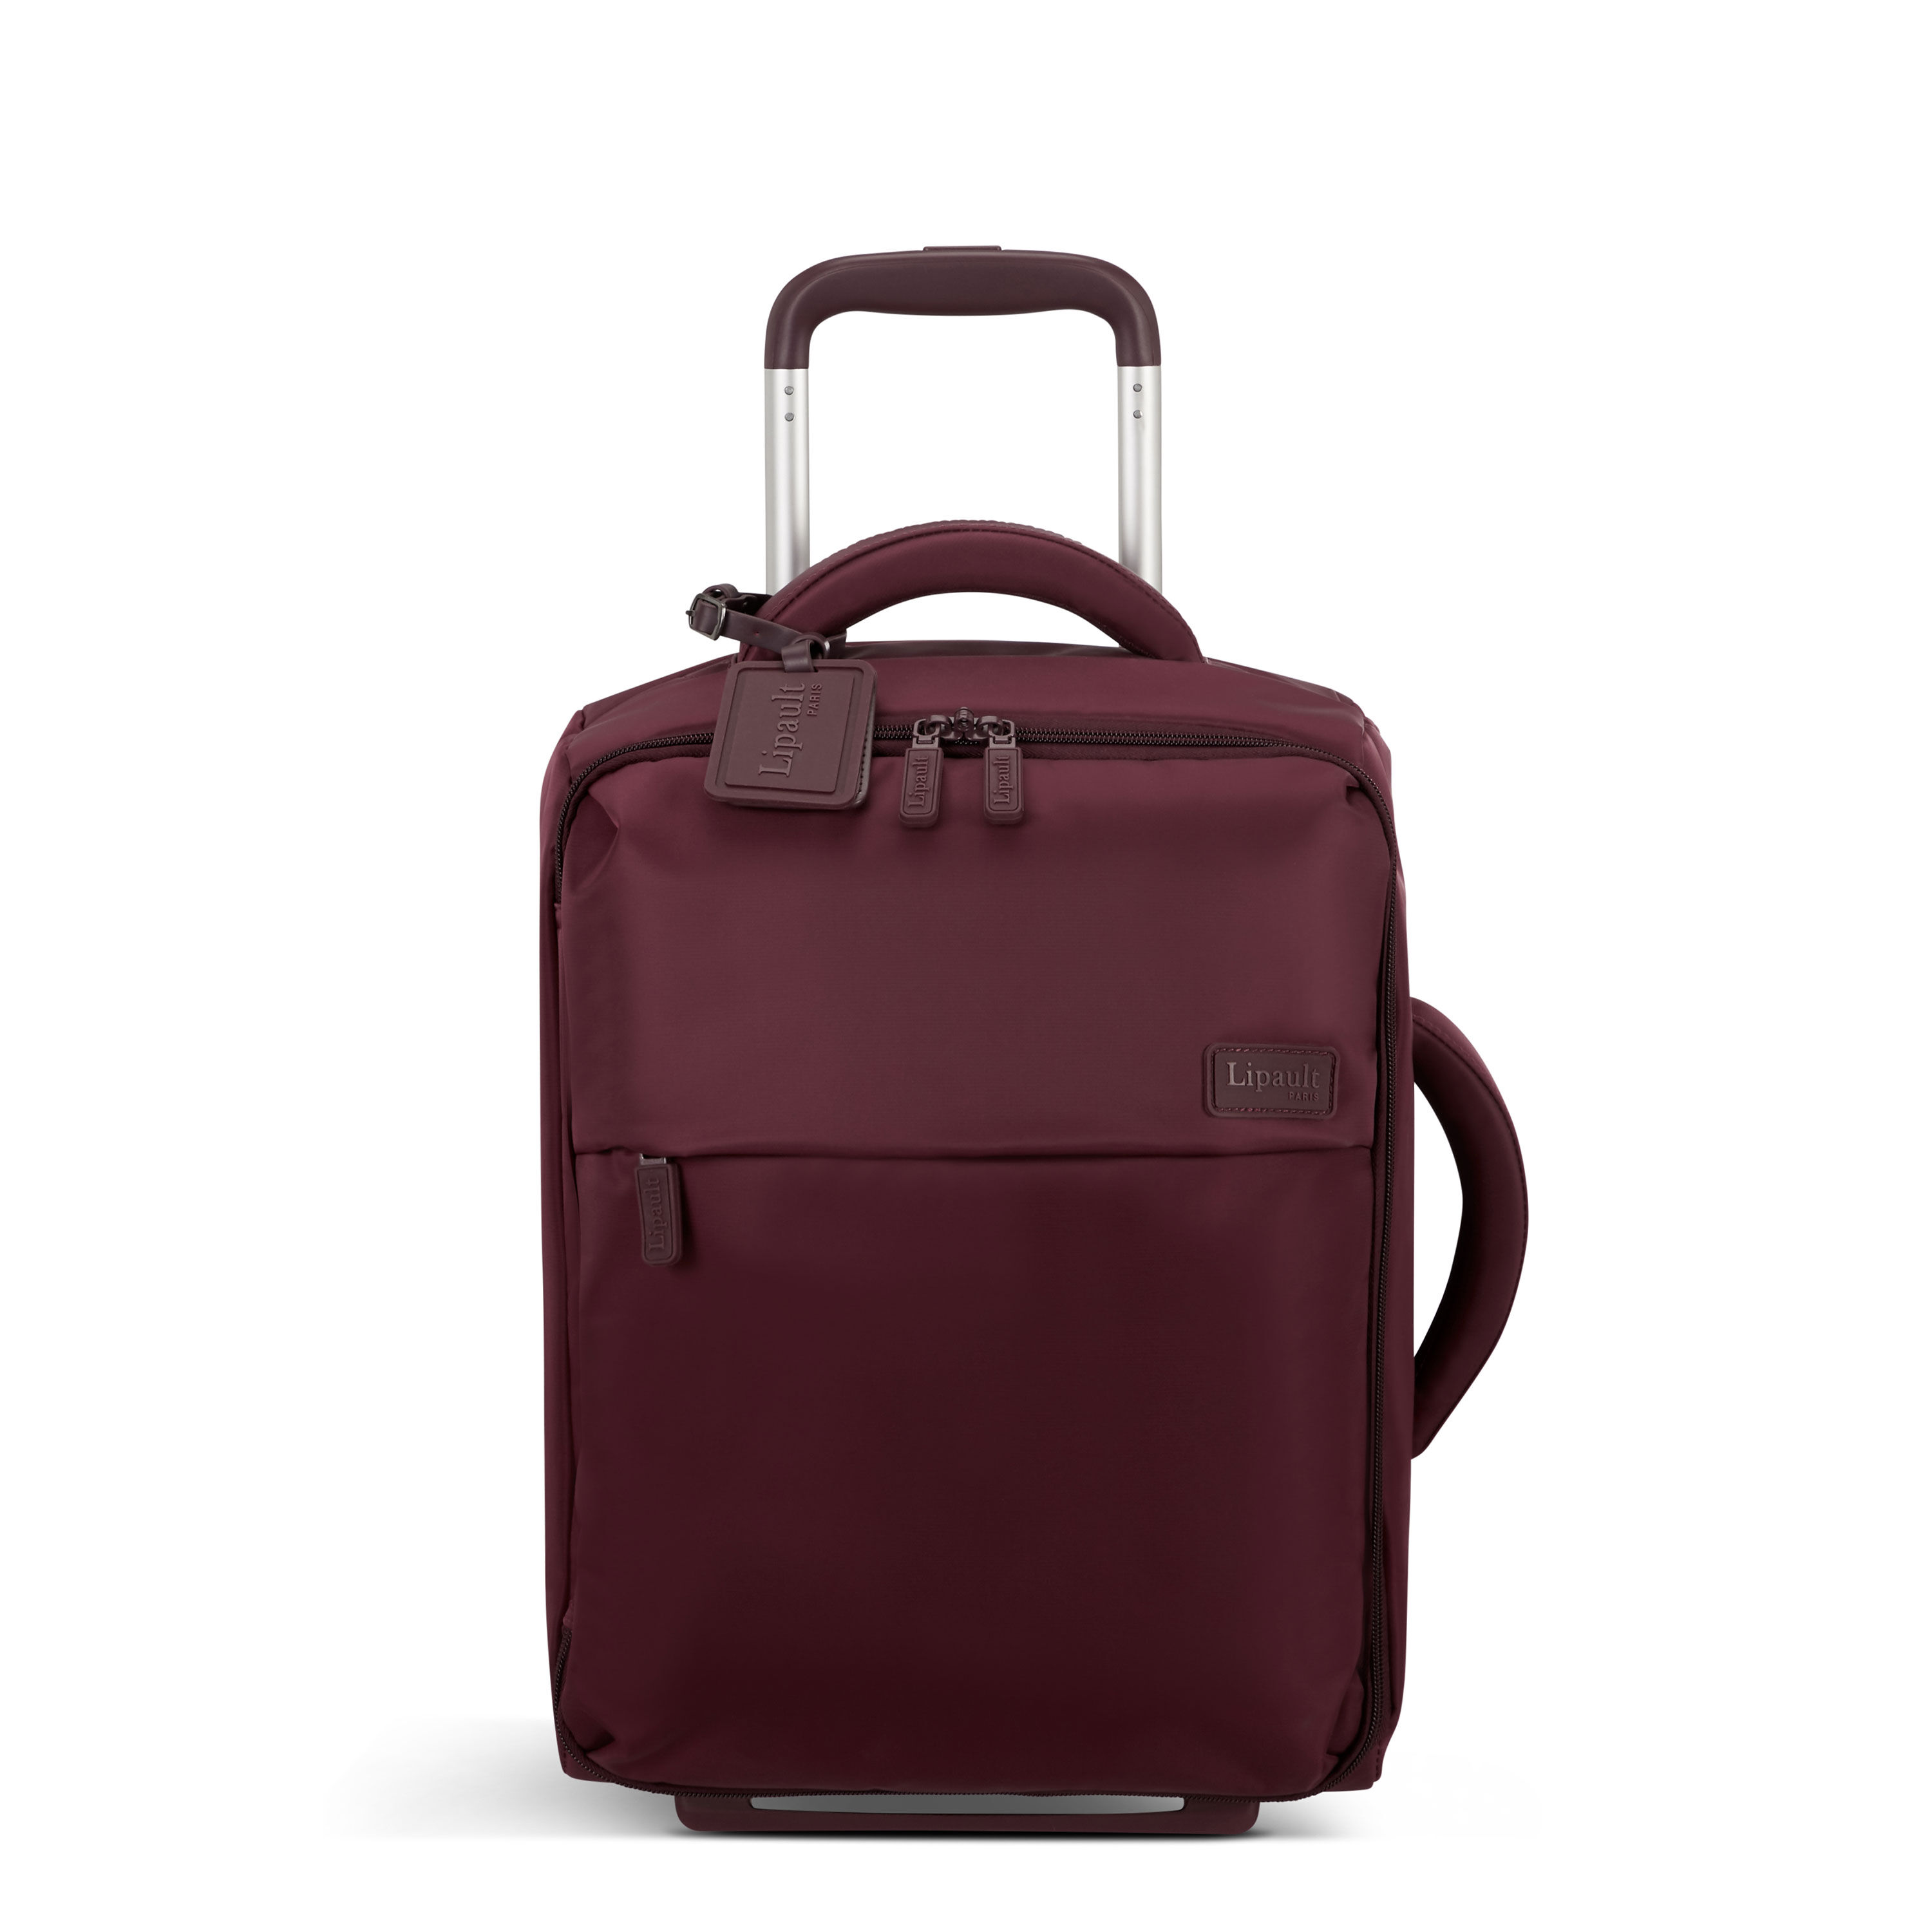 Lipault - 15% off Travel Bags Sitewide!